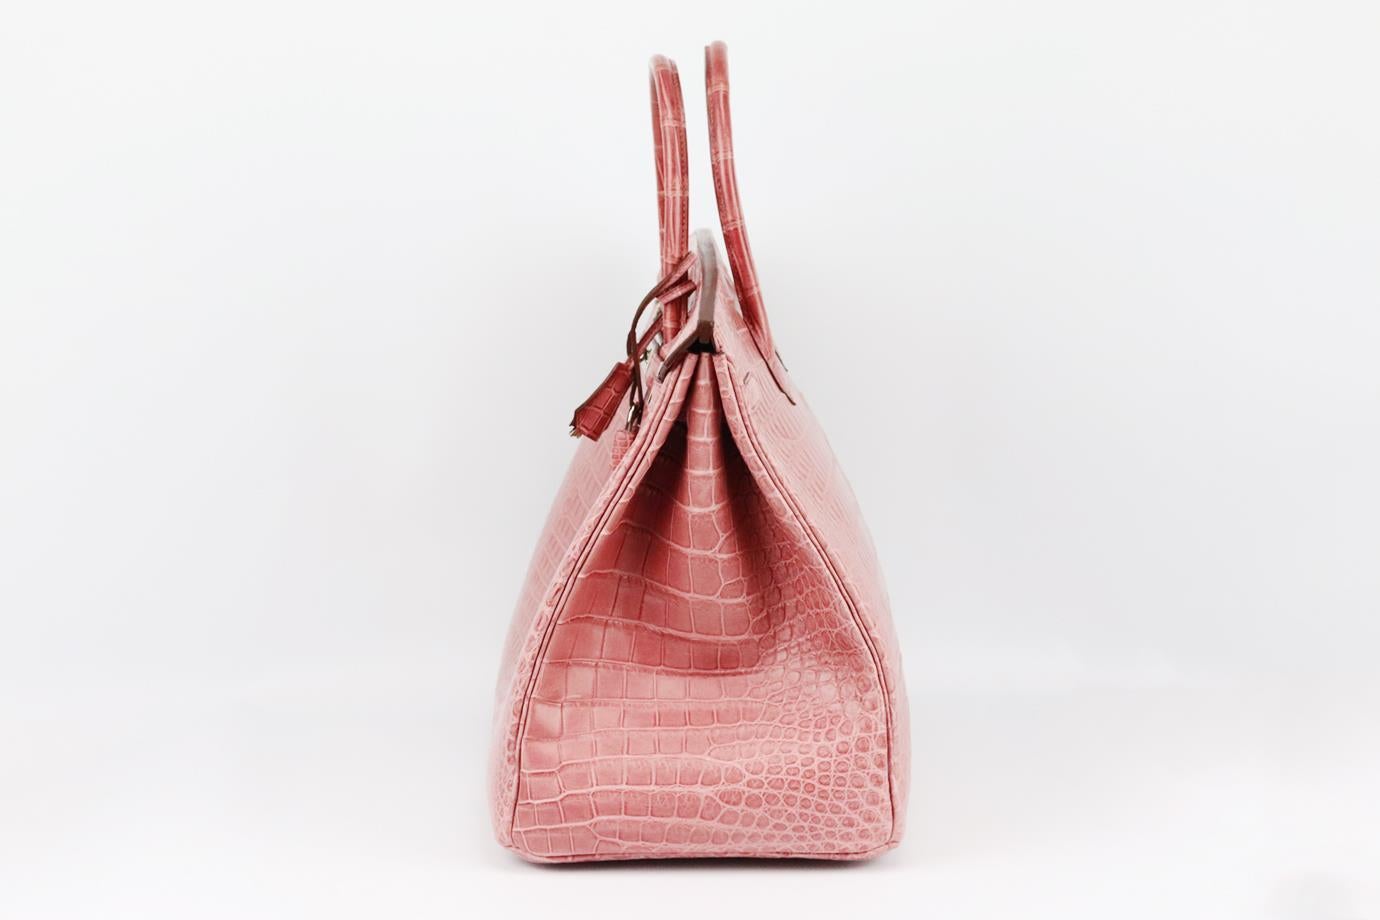 Hermès 2013 Birkin 40cm Matte Crocodile Porosus leather bag. Made in France, this beautiful 2013 Hermès ‘Birkin’ handbag has been made from a dusty pink-tone ‘Matte Crocodile Porosus’ exterior in ‘Bois de Rose’, this piece is decorated with silver